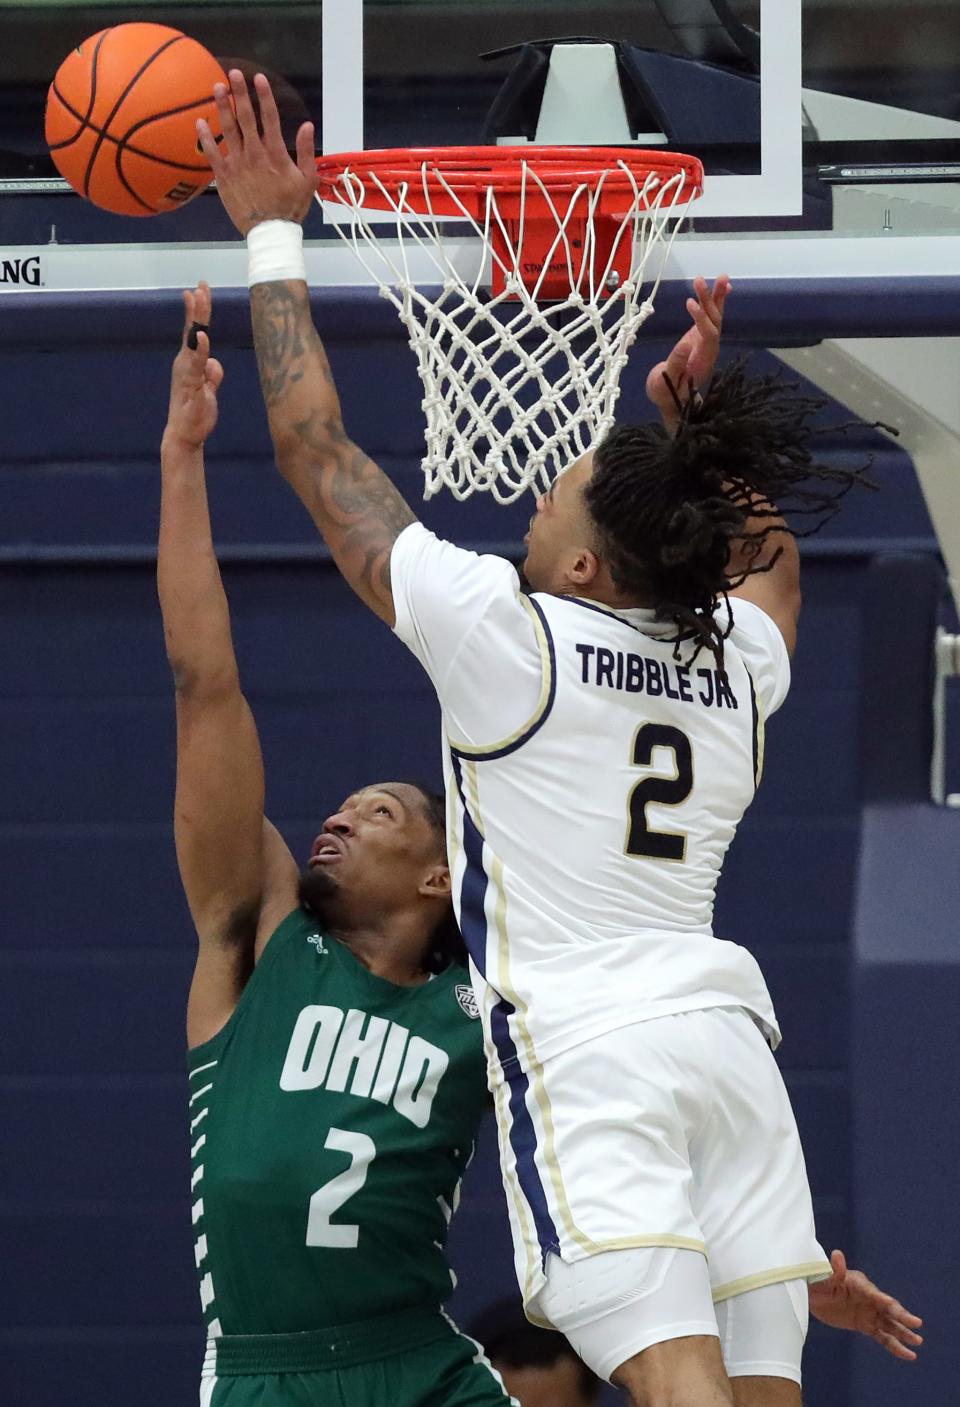 Akron guard Greg Tribble blocks the shot of Ohio's Miles Brown during the second half Tuesday in Akron.